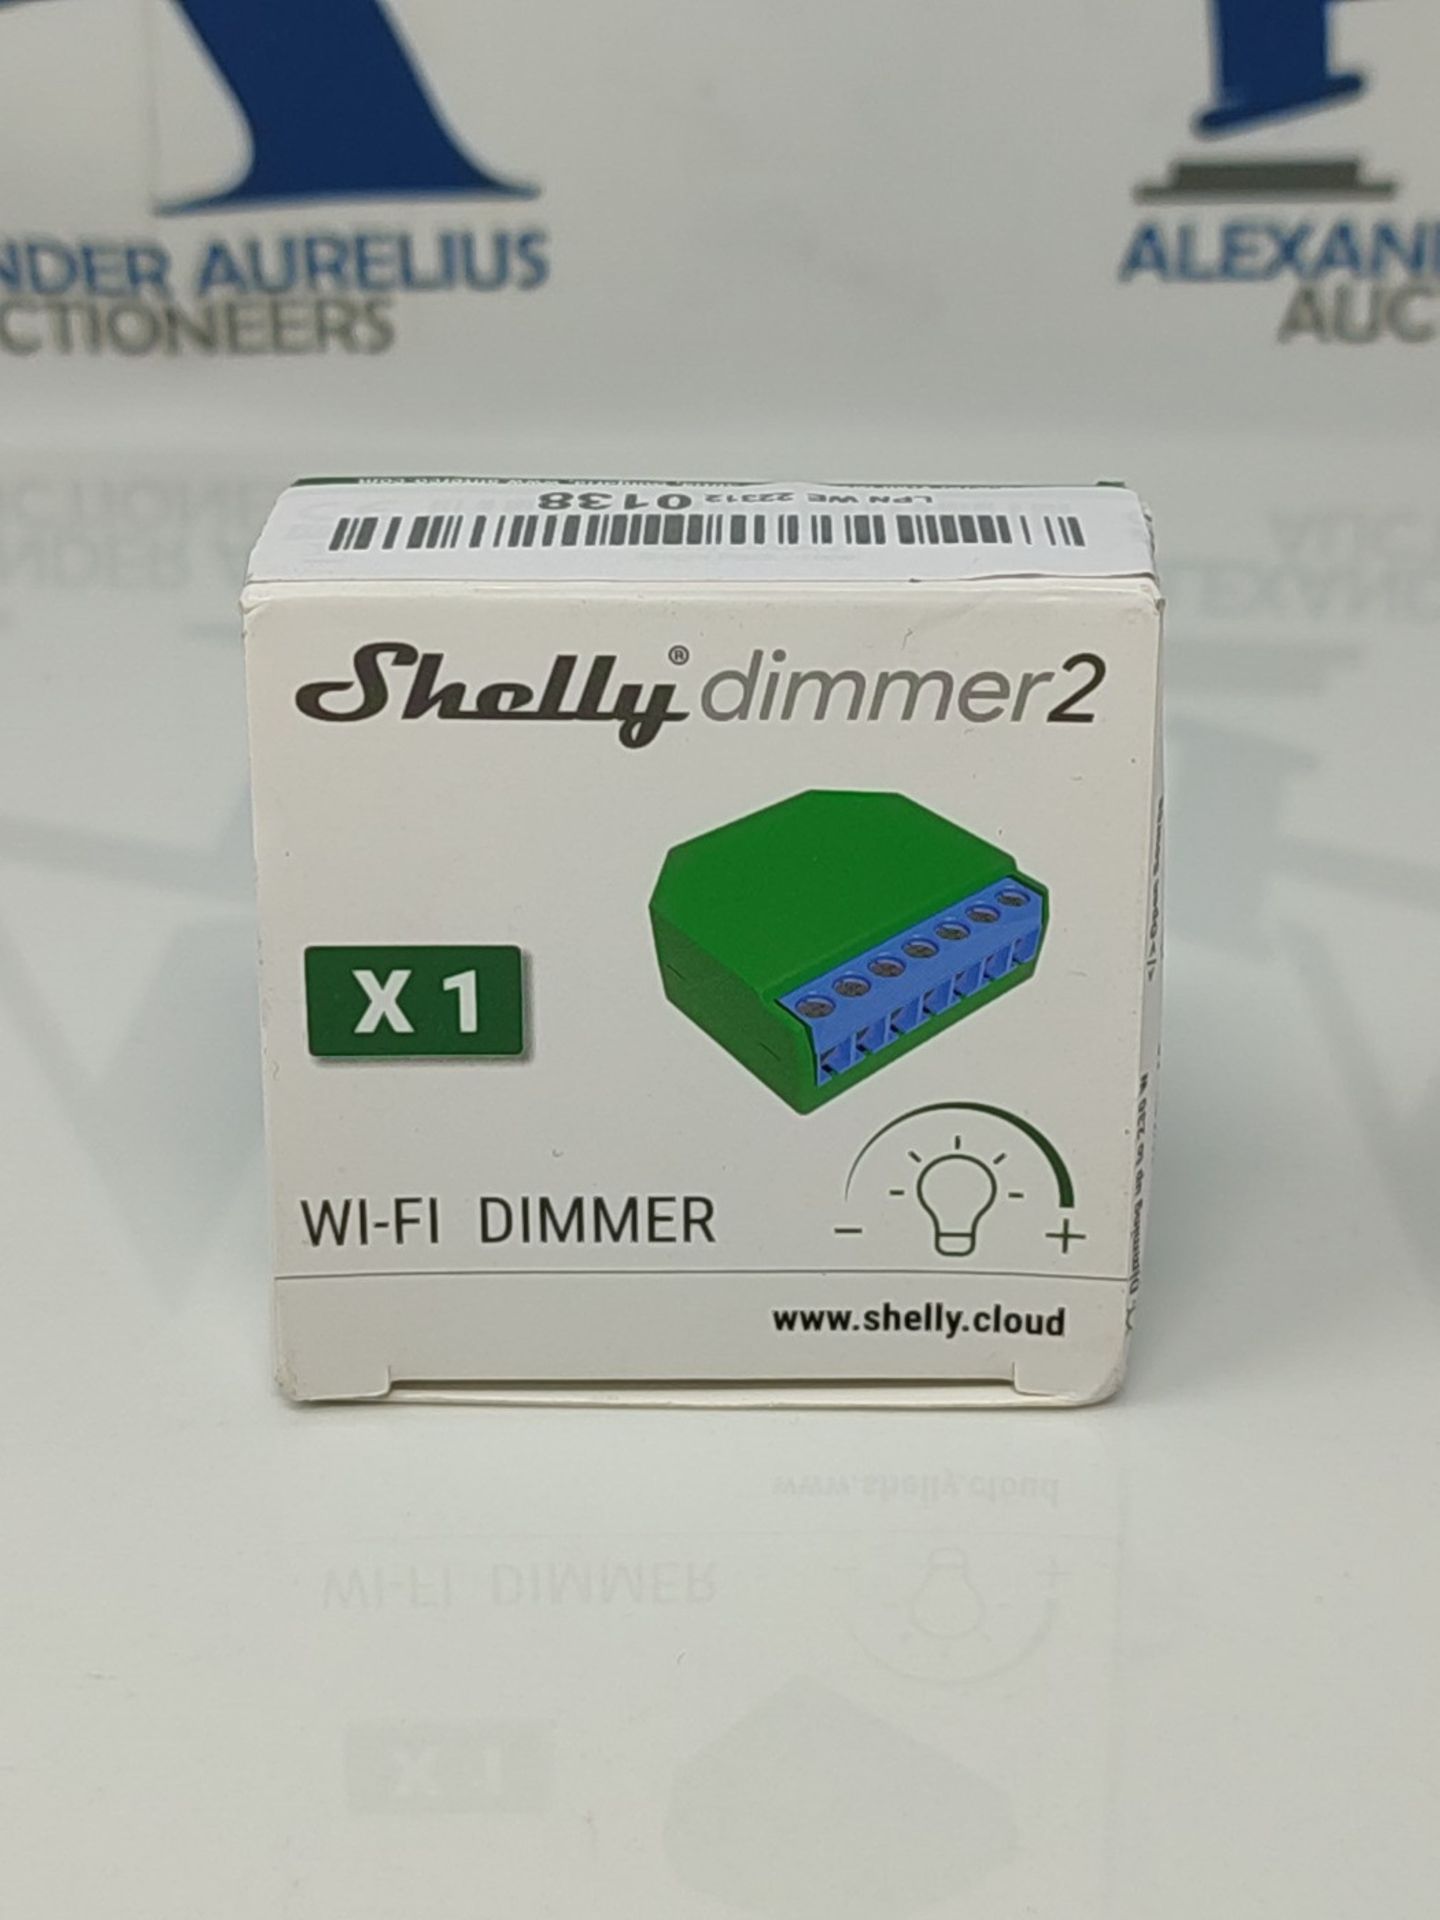 Shelly - Dimmer 2  Version 2021  WiFi dimmer suitable for Smart Home, Alexa & Go